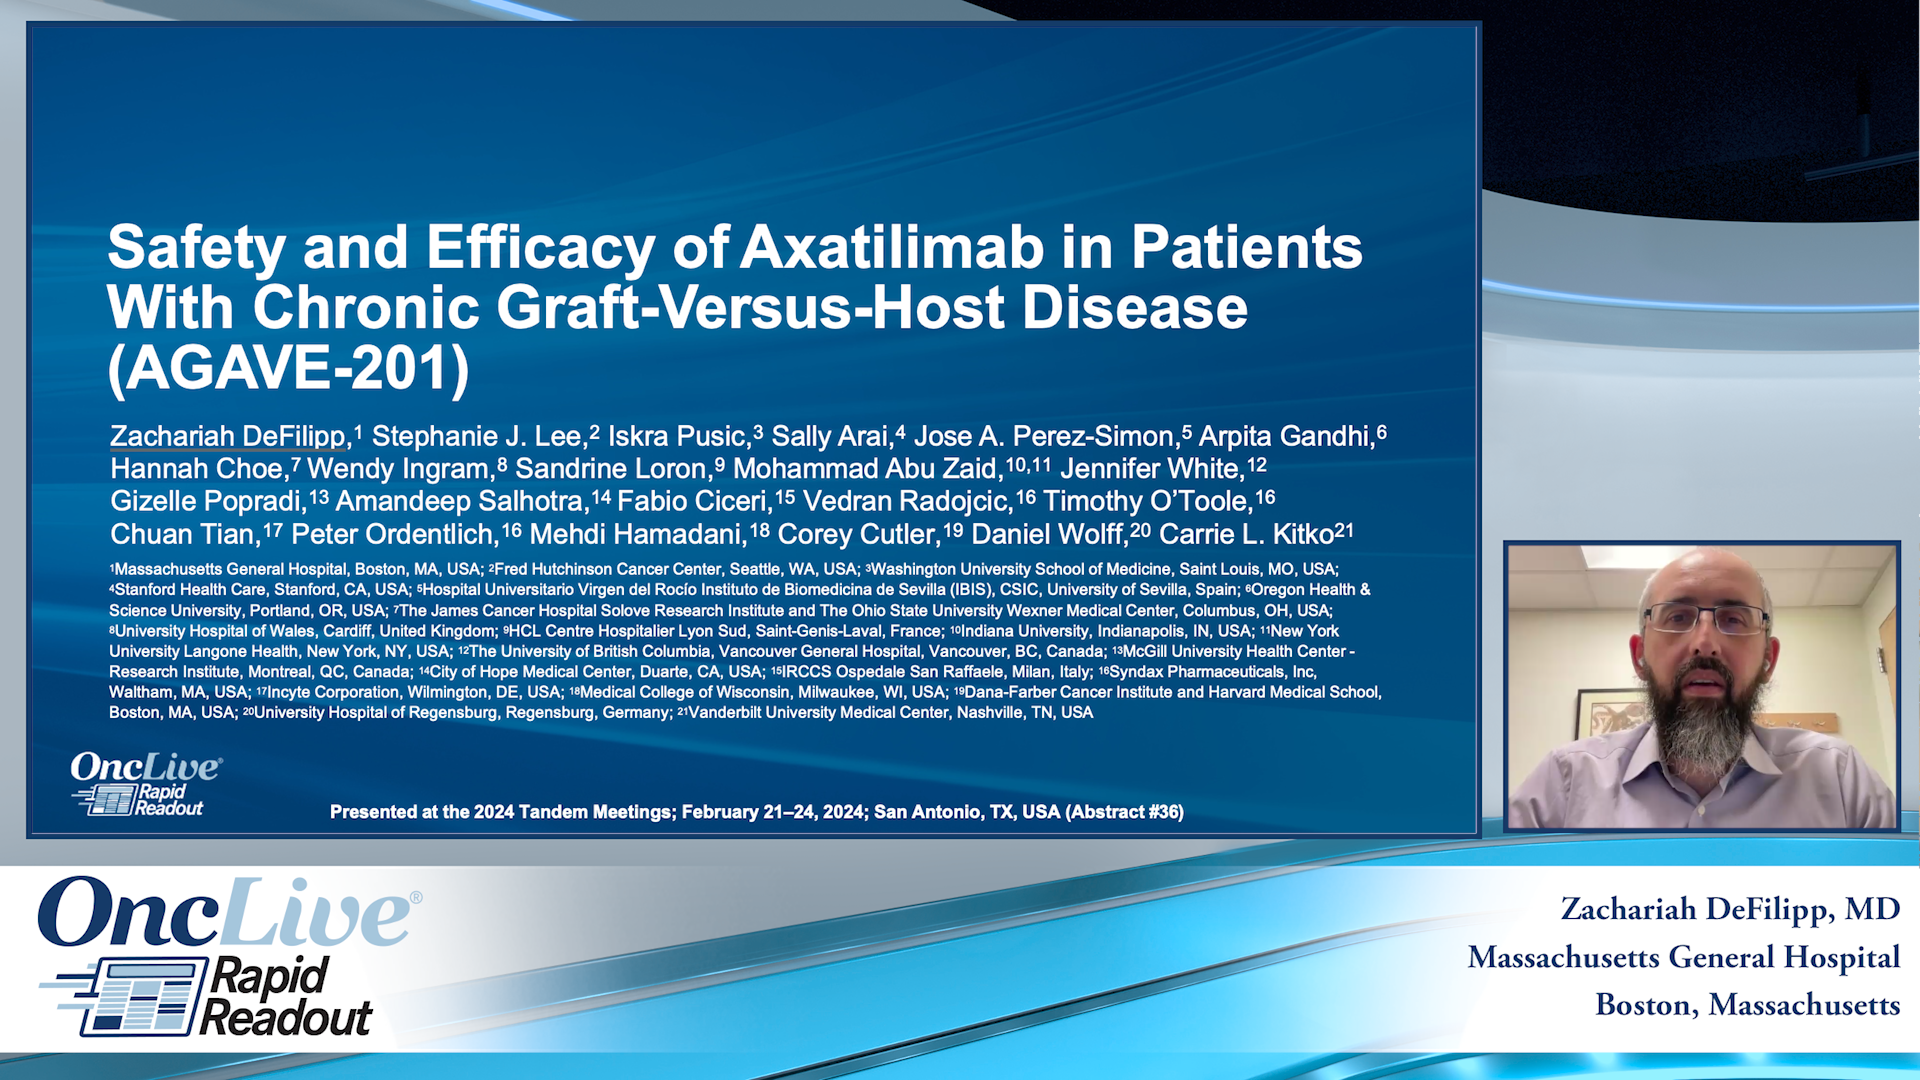 Safety and Efficacy of Axatilimab in Patients With Chronic Graft-Versus-Host Disease (AGAVE-201)